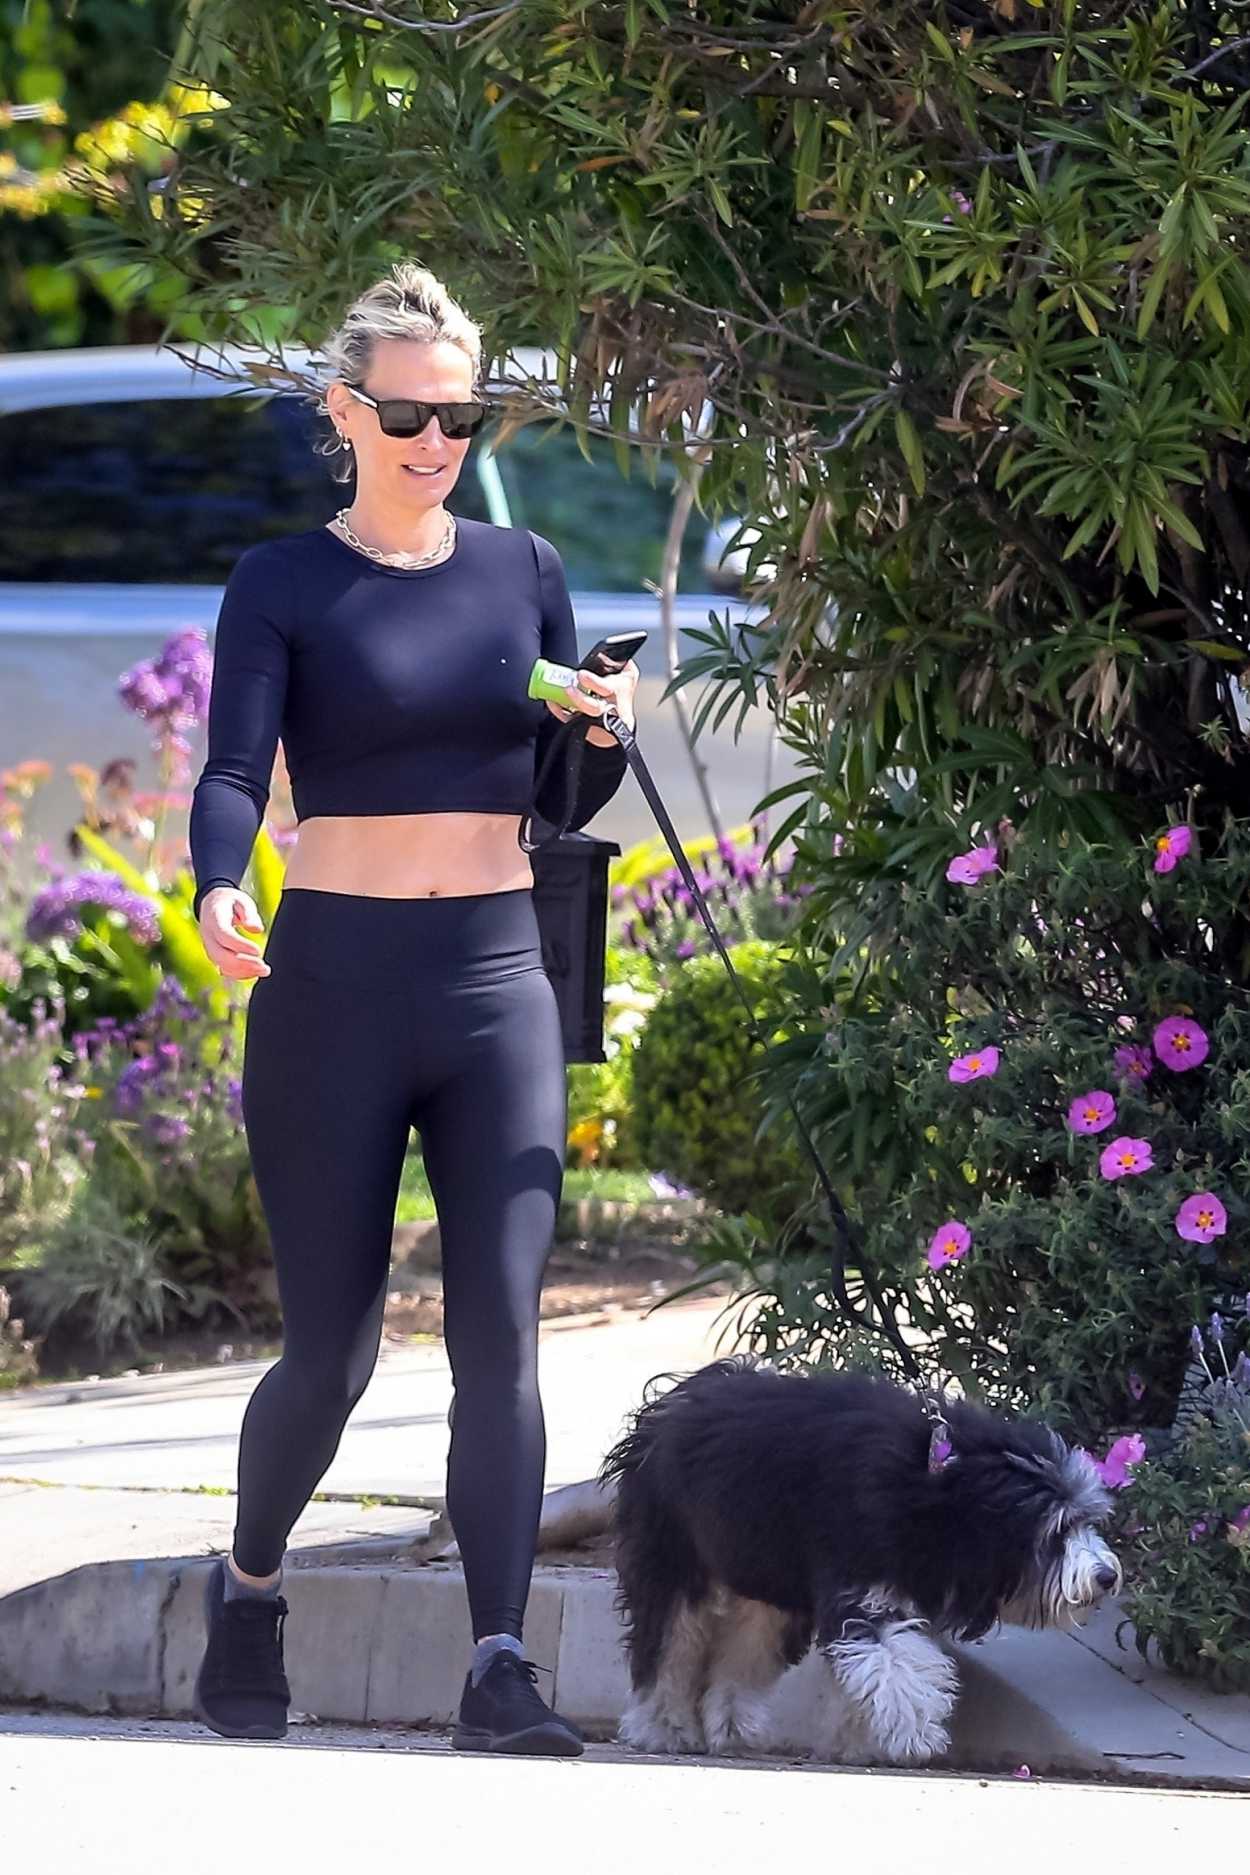 Molly Sims in a Black Workout Clothes Walks Her Dog for a Morning Walk ...